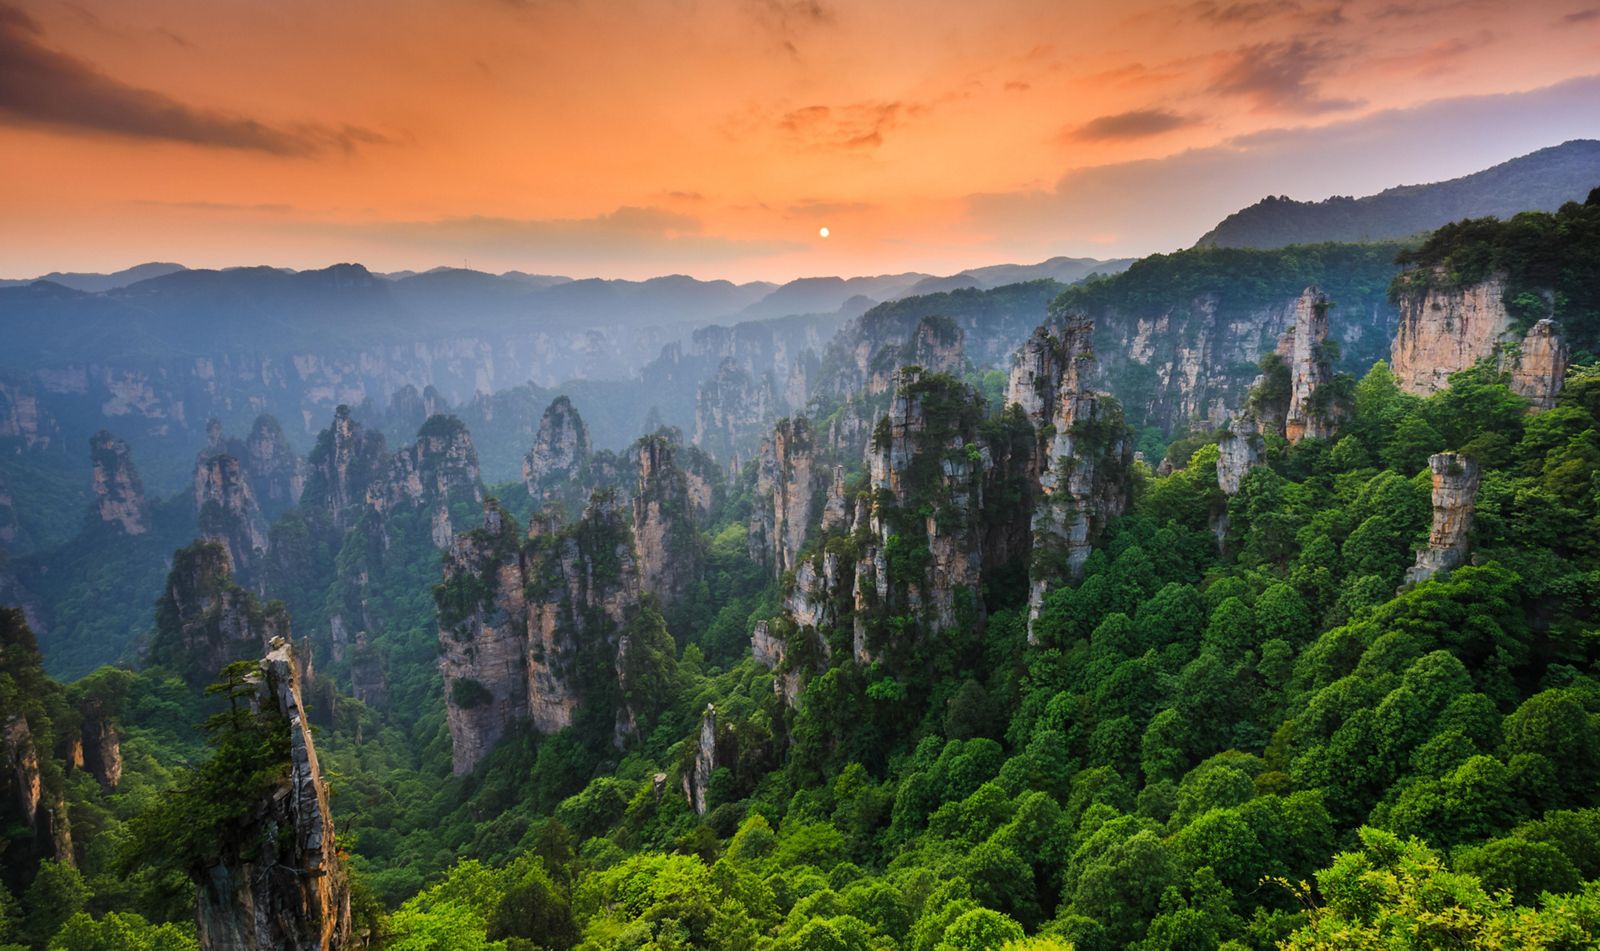 mountainous view of rock and greenery against a sunset sky